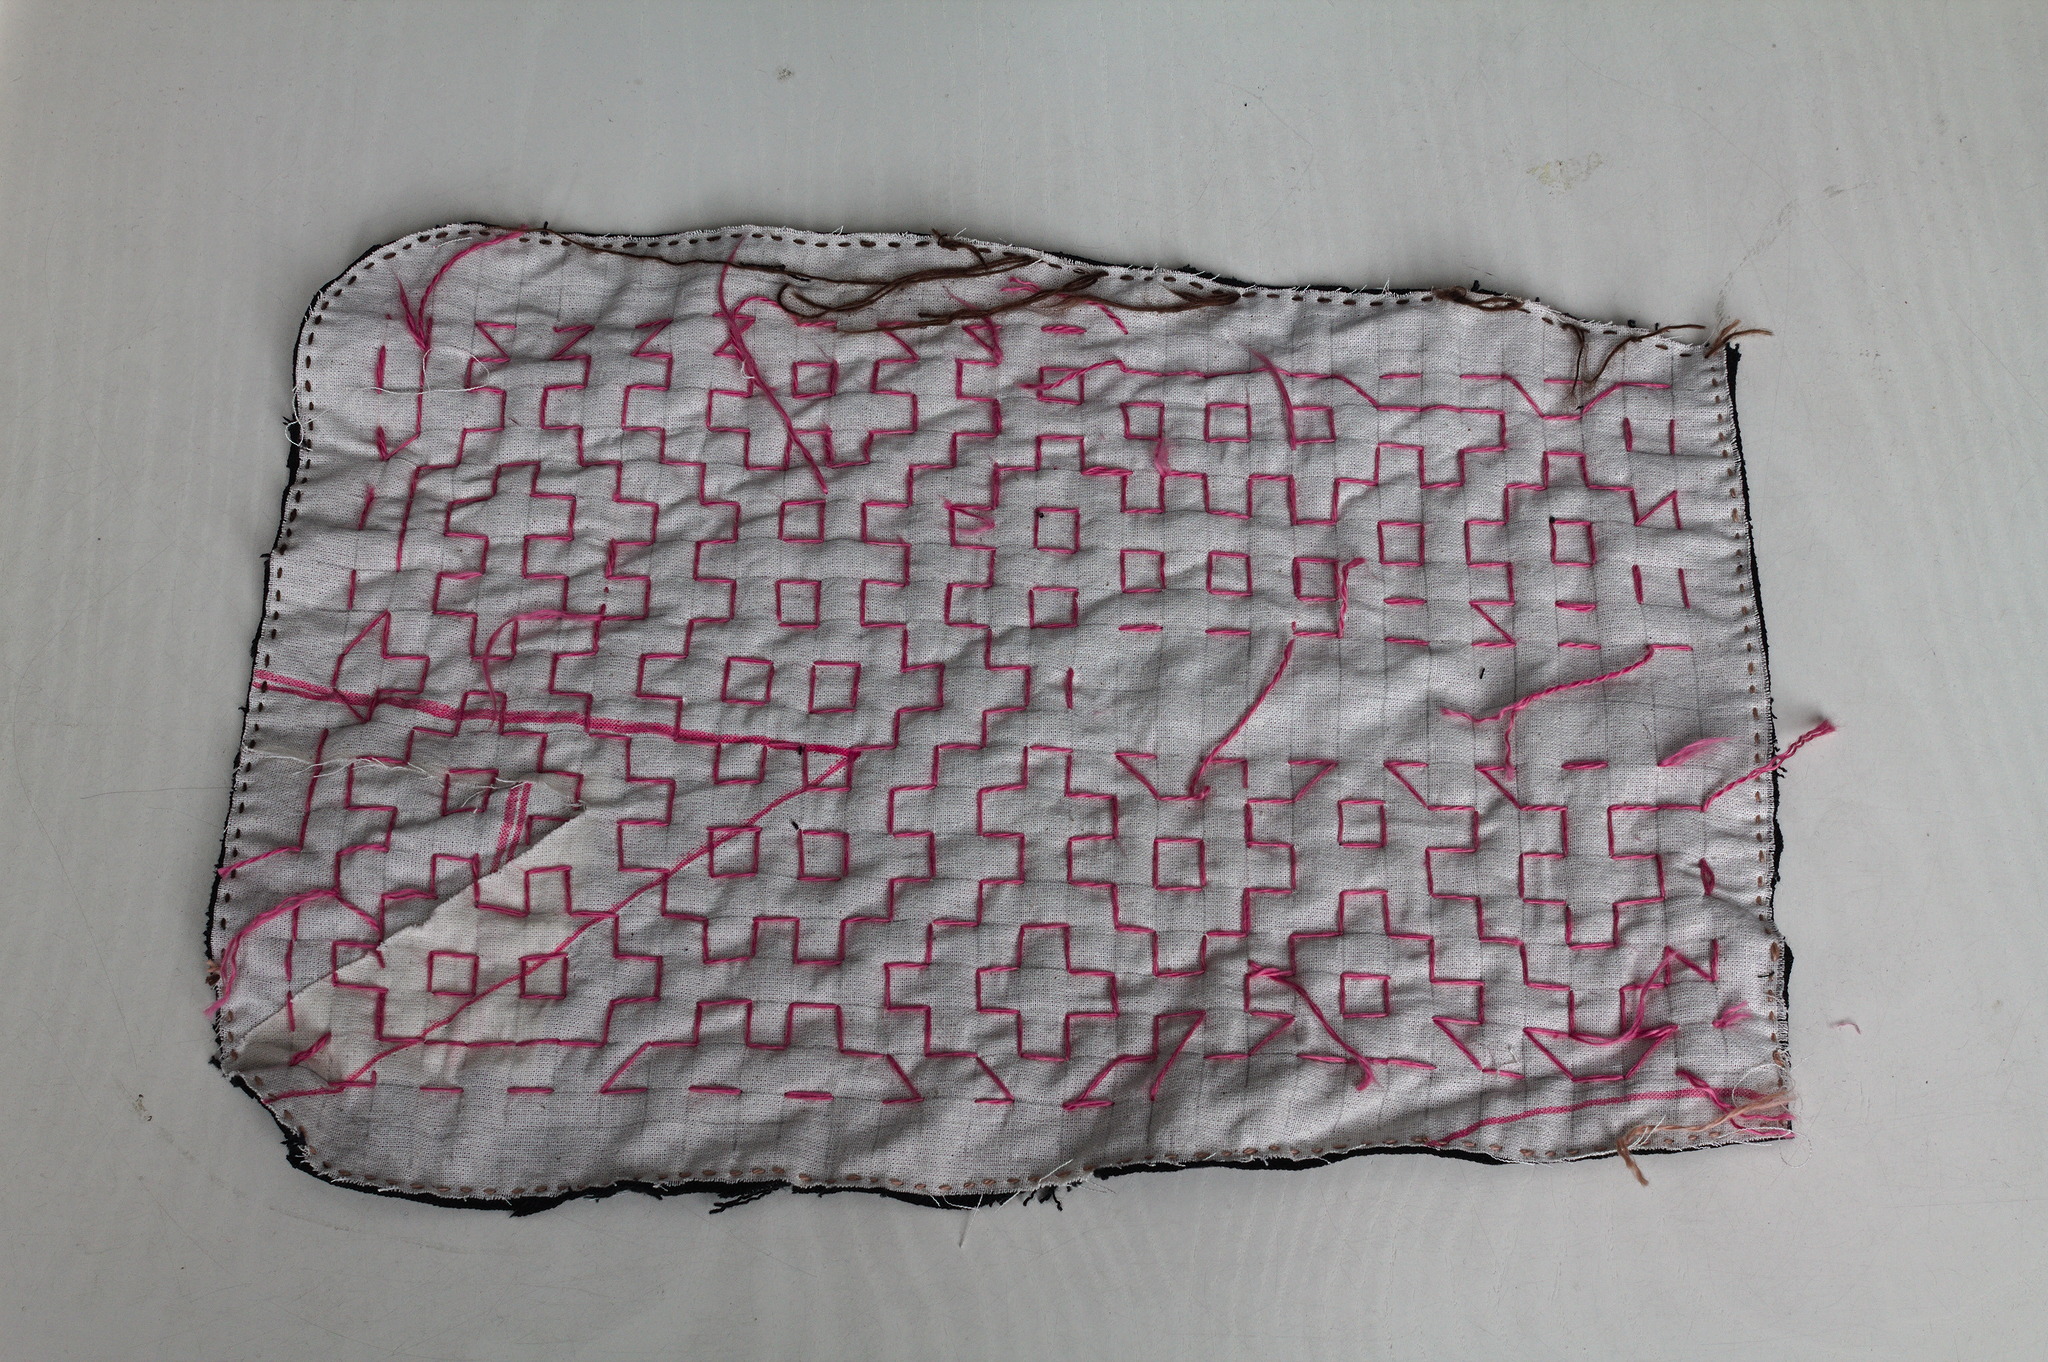 The wrong side of a pocket piece, showing a light coloured fabric
with a grid drawn in pencil, a line of small stitches all around
the edges and a mess of thread ends left hanging.